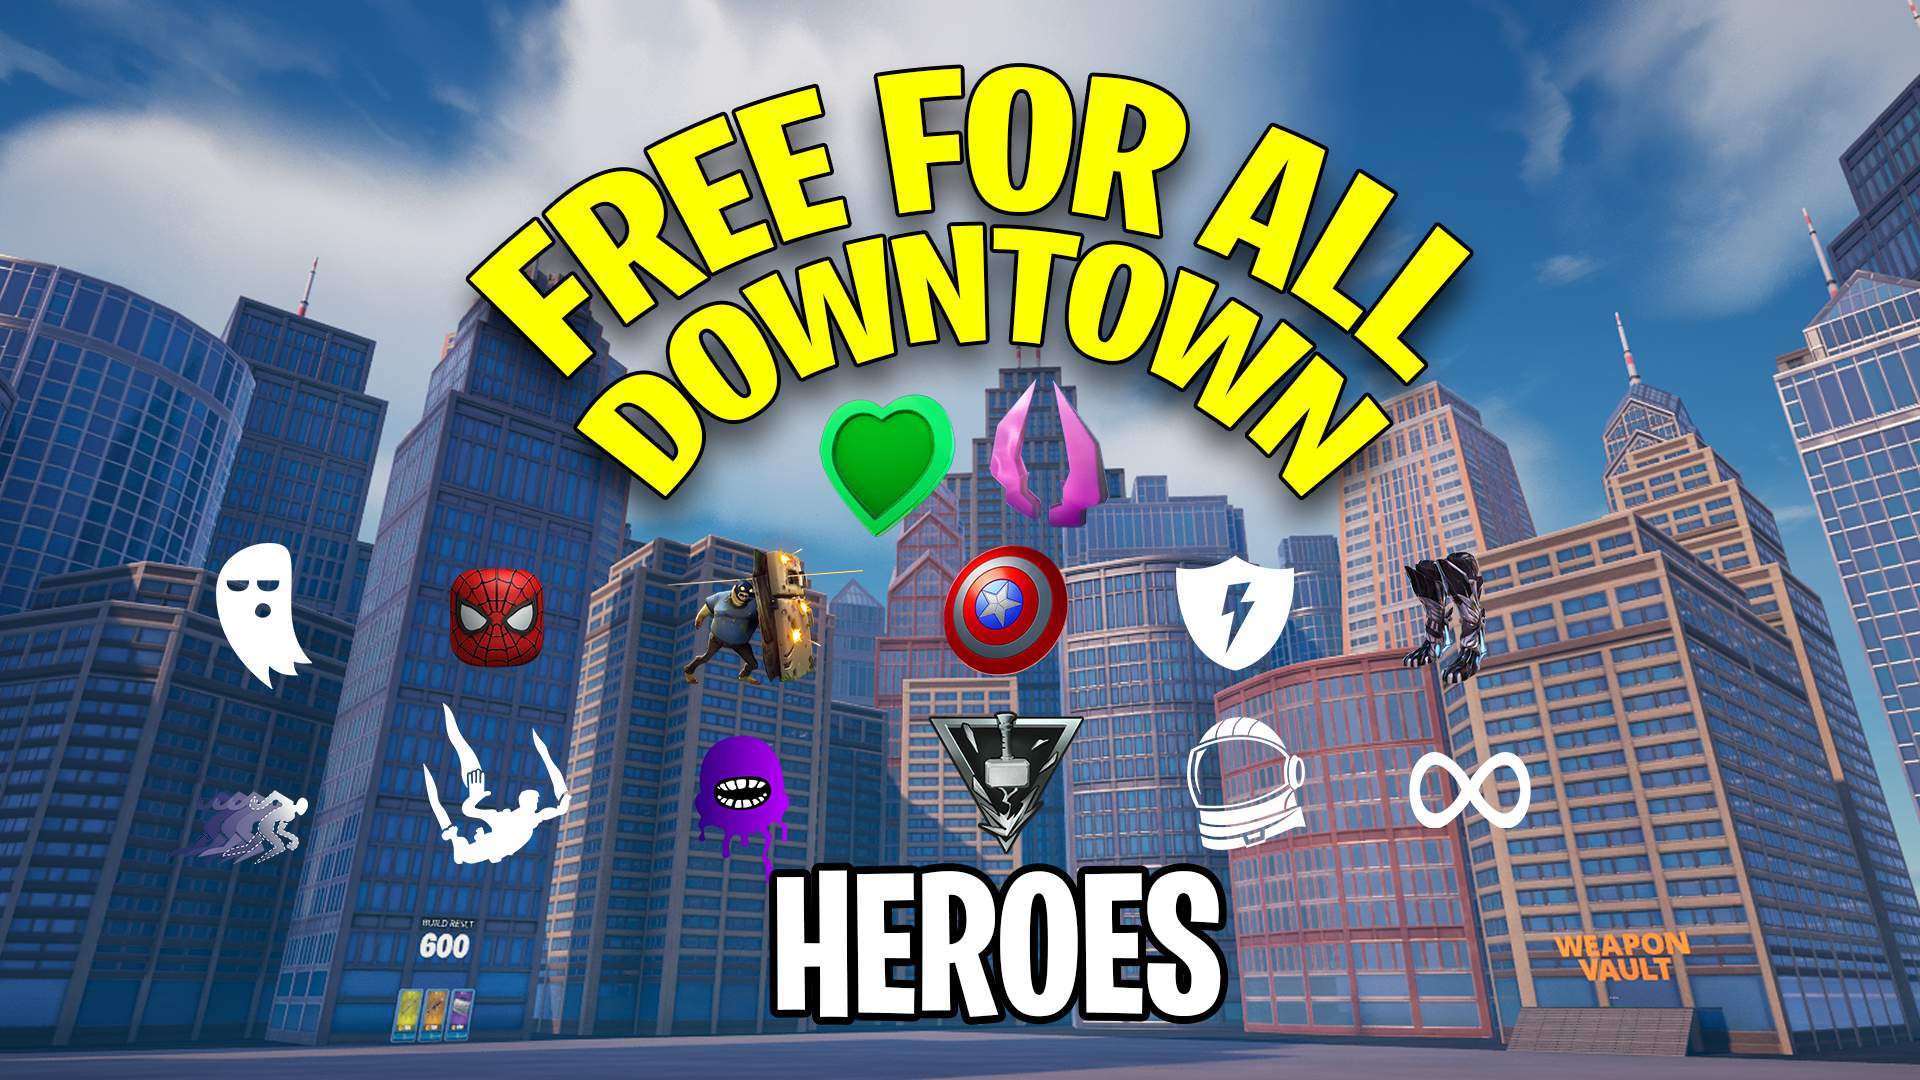 DOWNTOWN - HEROES FREE FOR ALL